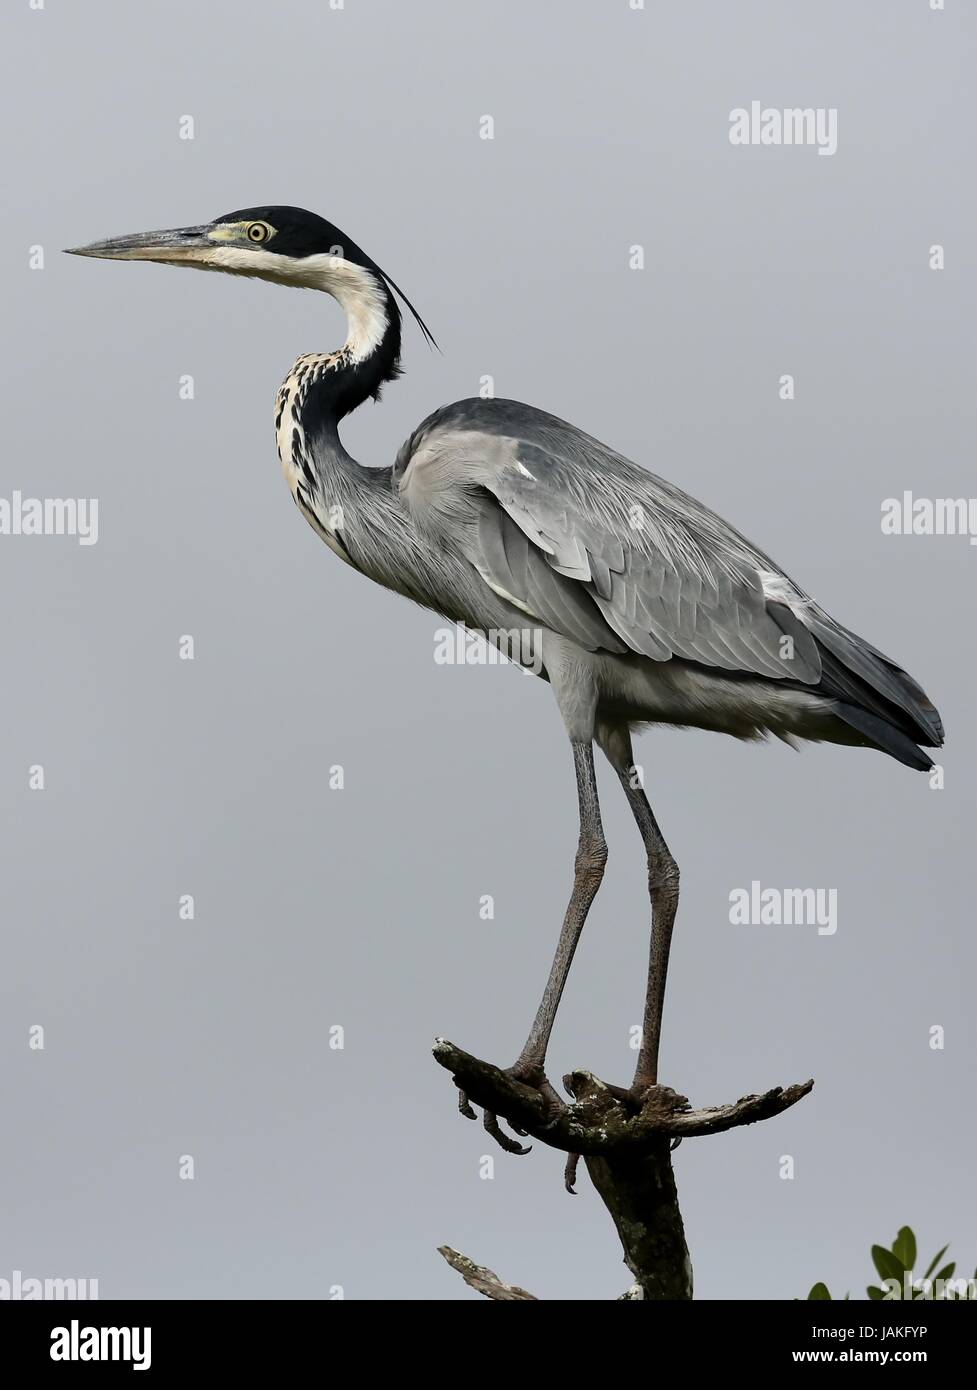 Black Heron bird with long legs and neck perched on a branch Stock Photo -  Alamy